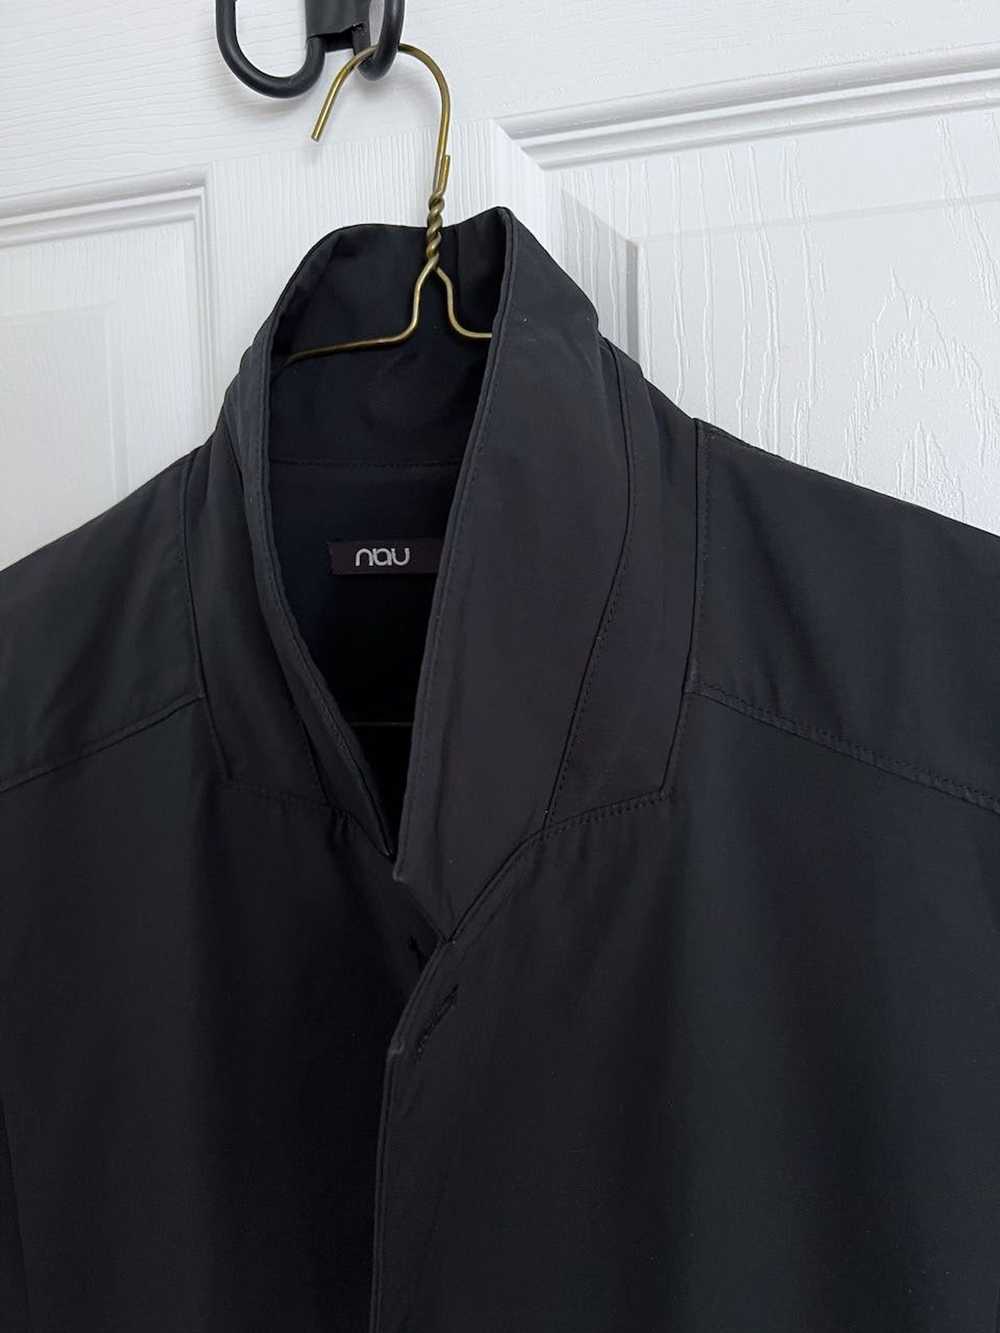 Nau Stretch Recycled Polyester Commuter Jacket - image 6